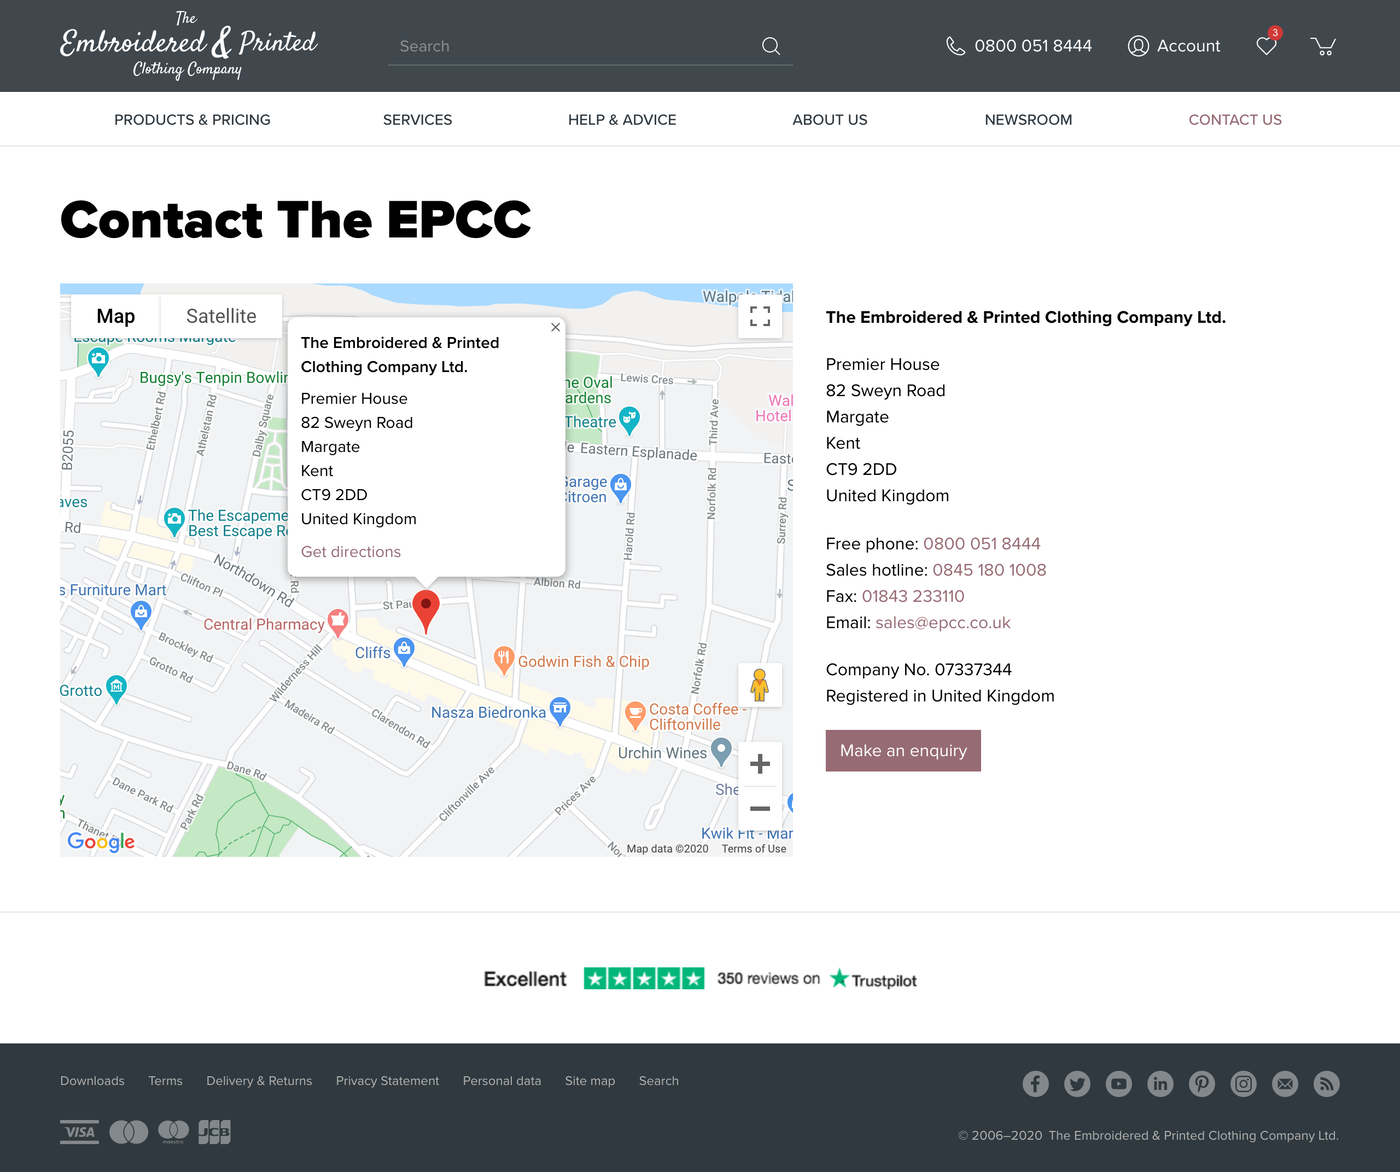 The EPCC Contact us